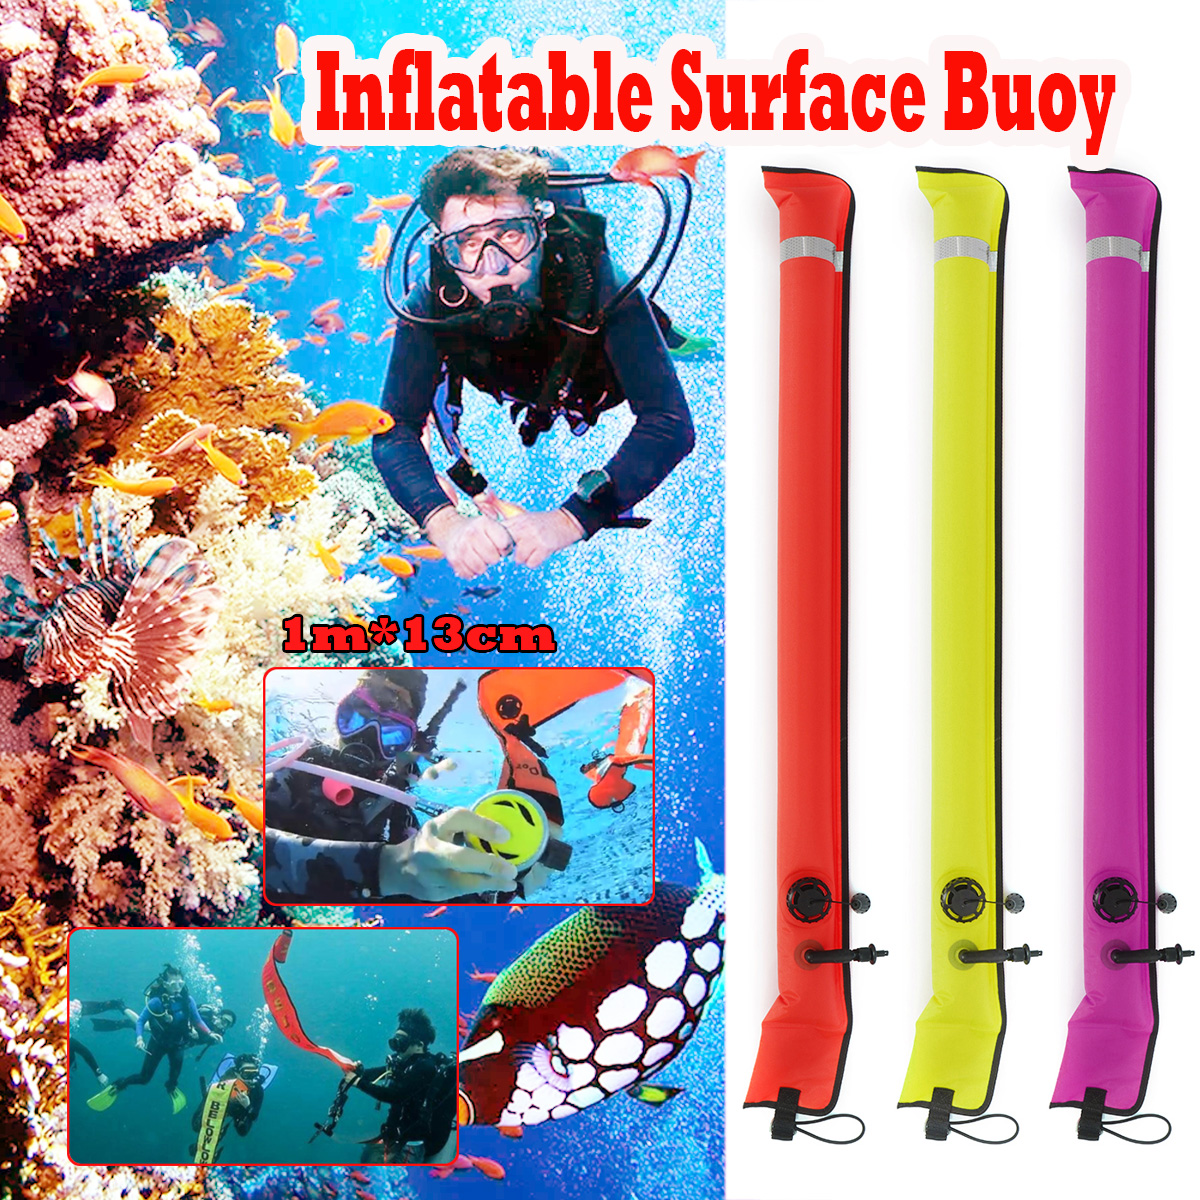 1m13cm-Portatile-Immersione-Immersione-Superficie-Marcatore-Boa-SMB-Safety-Inflatable-Float-1647546-1